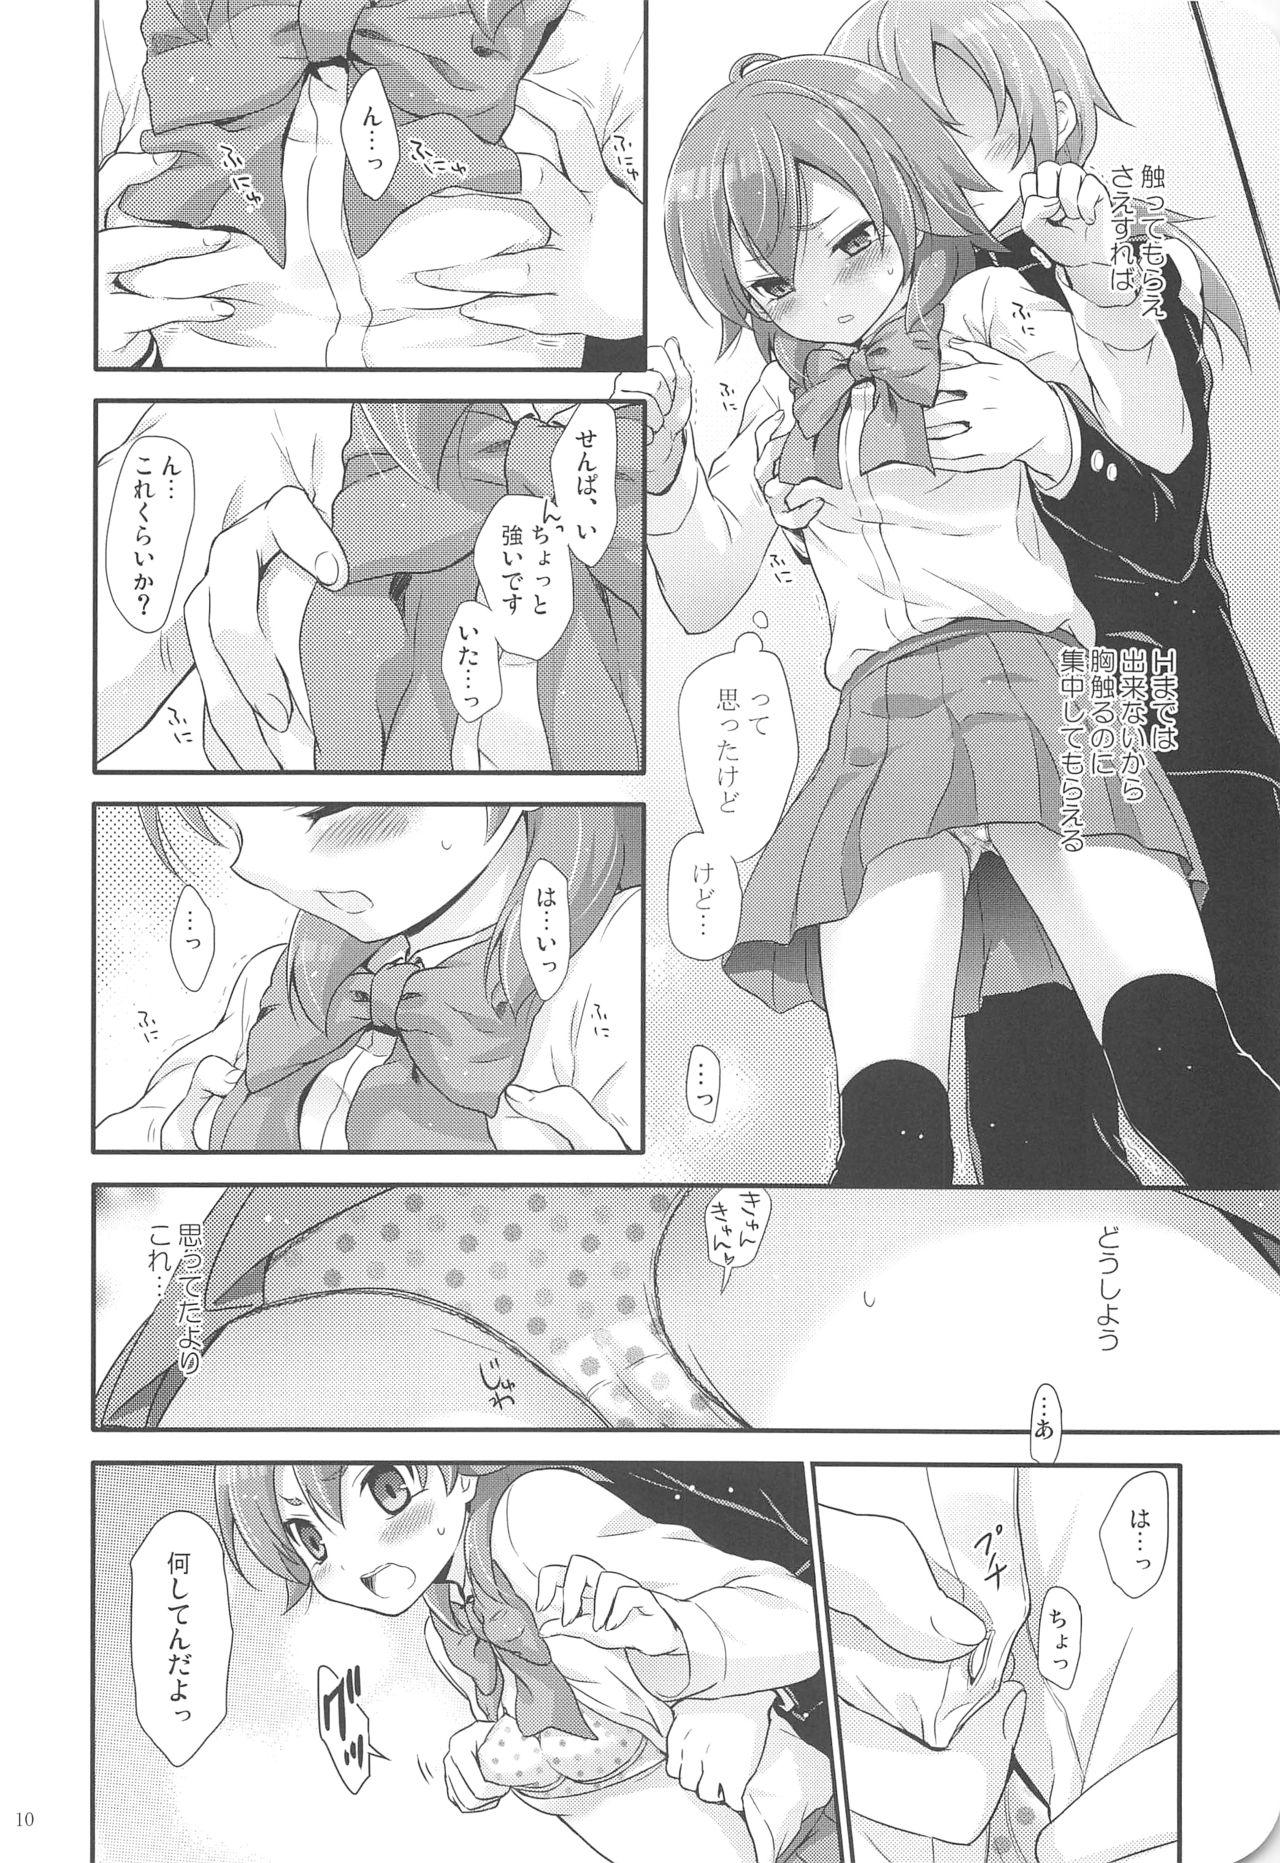 Blackmail full up mind - Inazuma eleven Prostitute - Page 9